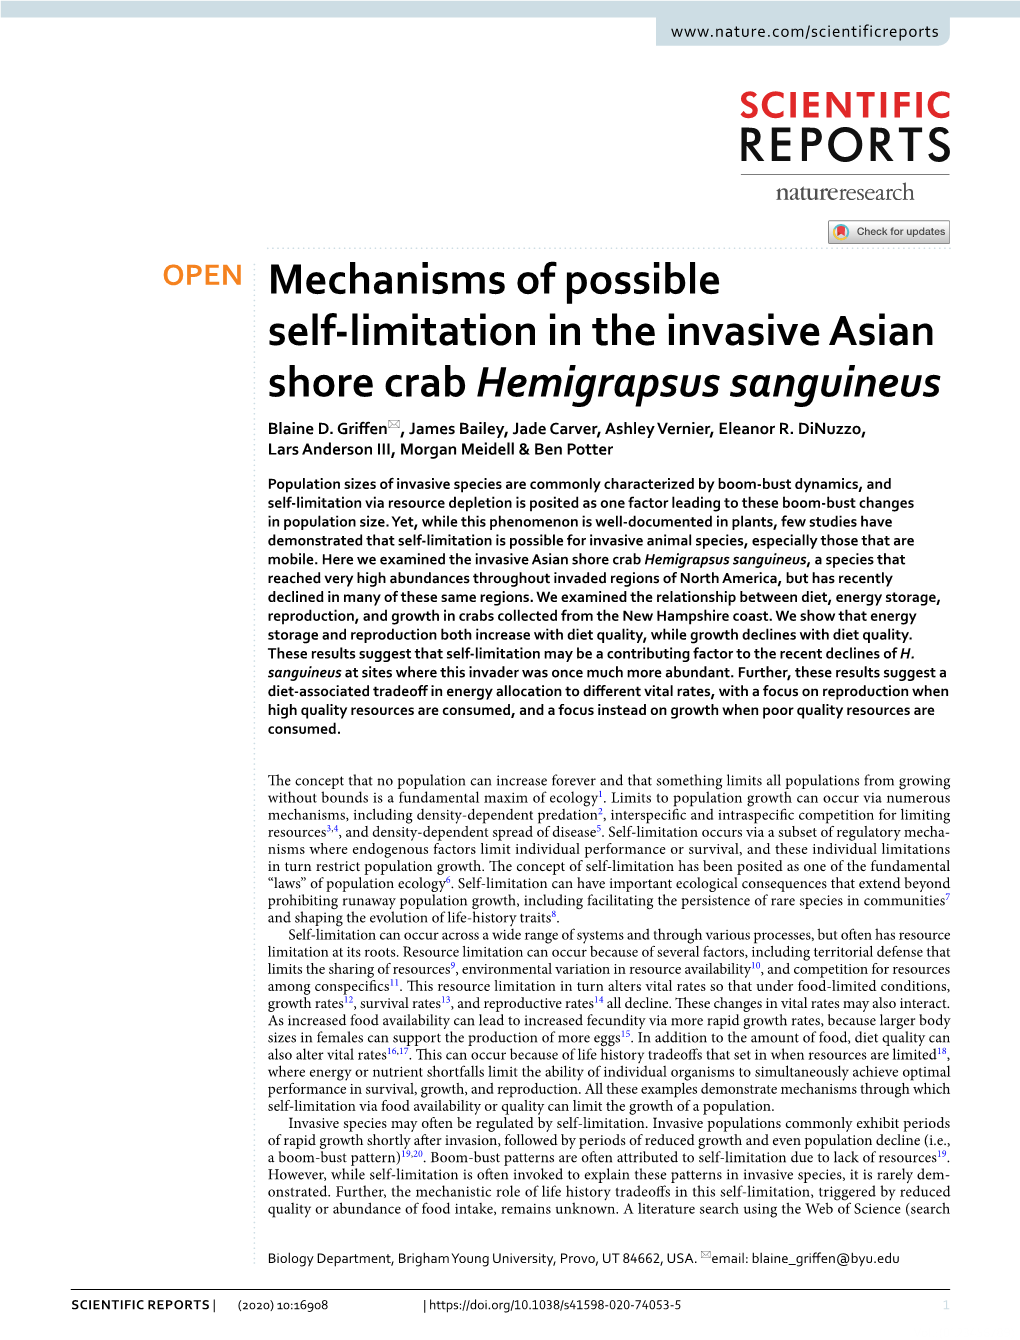 Mechanisms of Possible Self-Limitation in the Invasive Asian Shore Crab